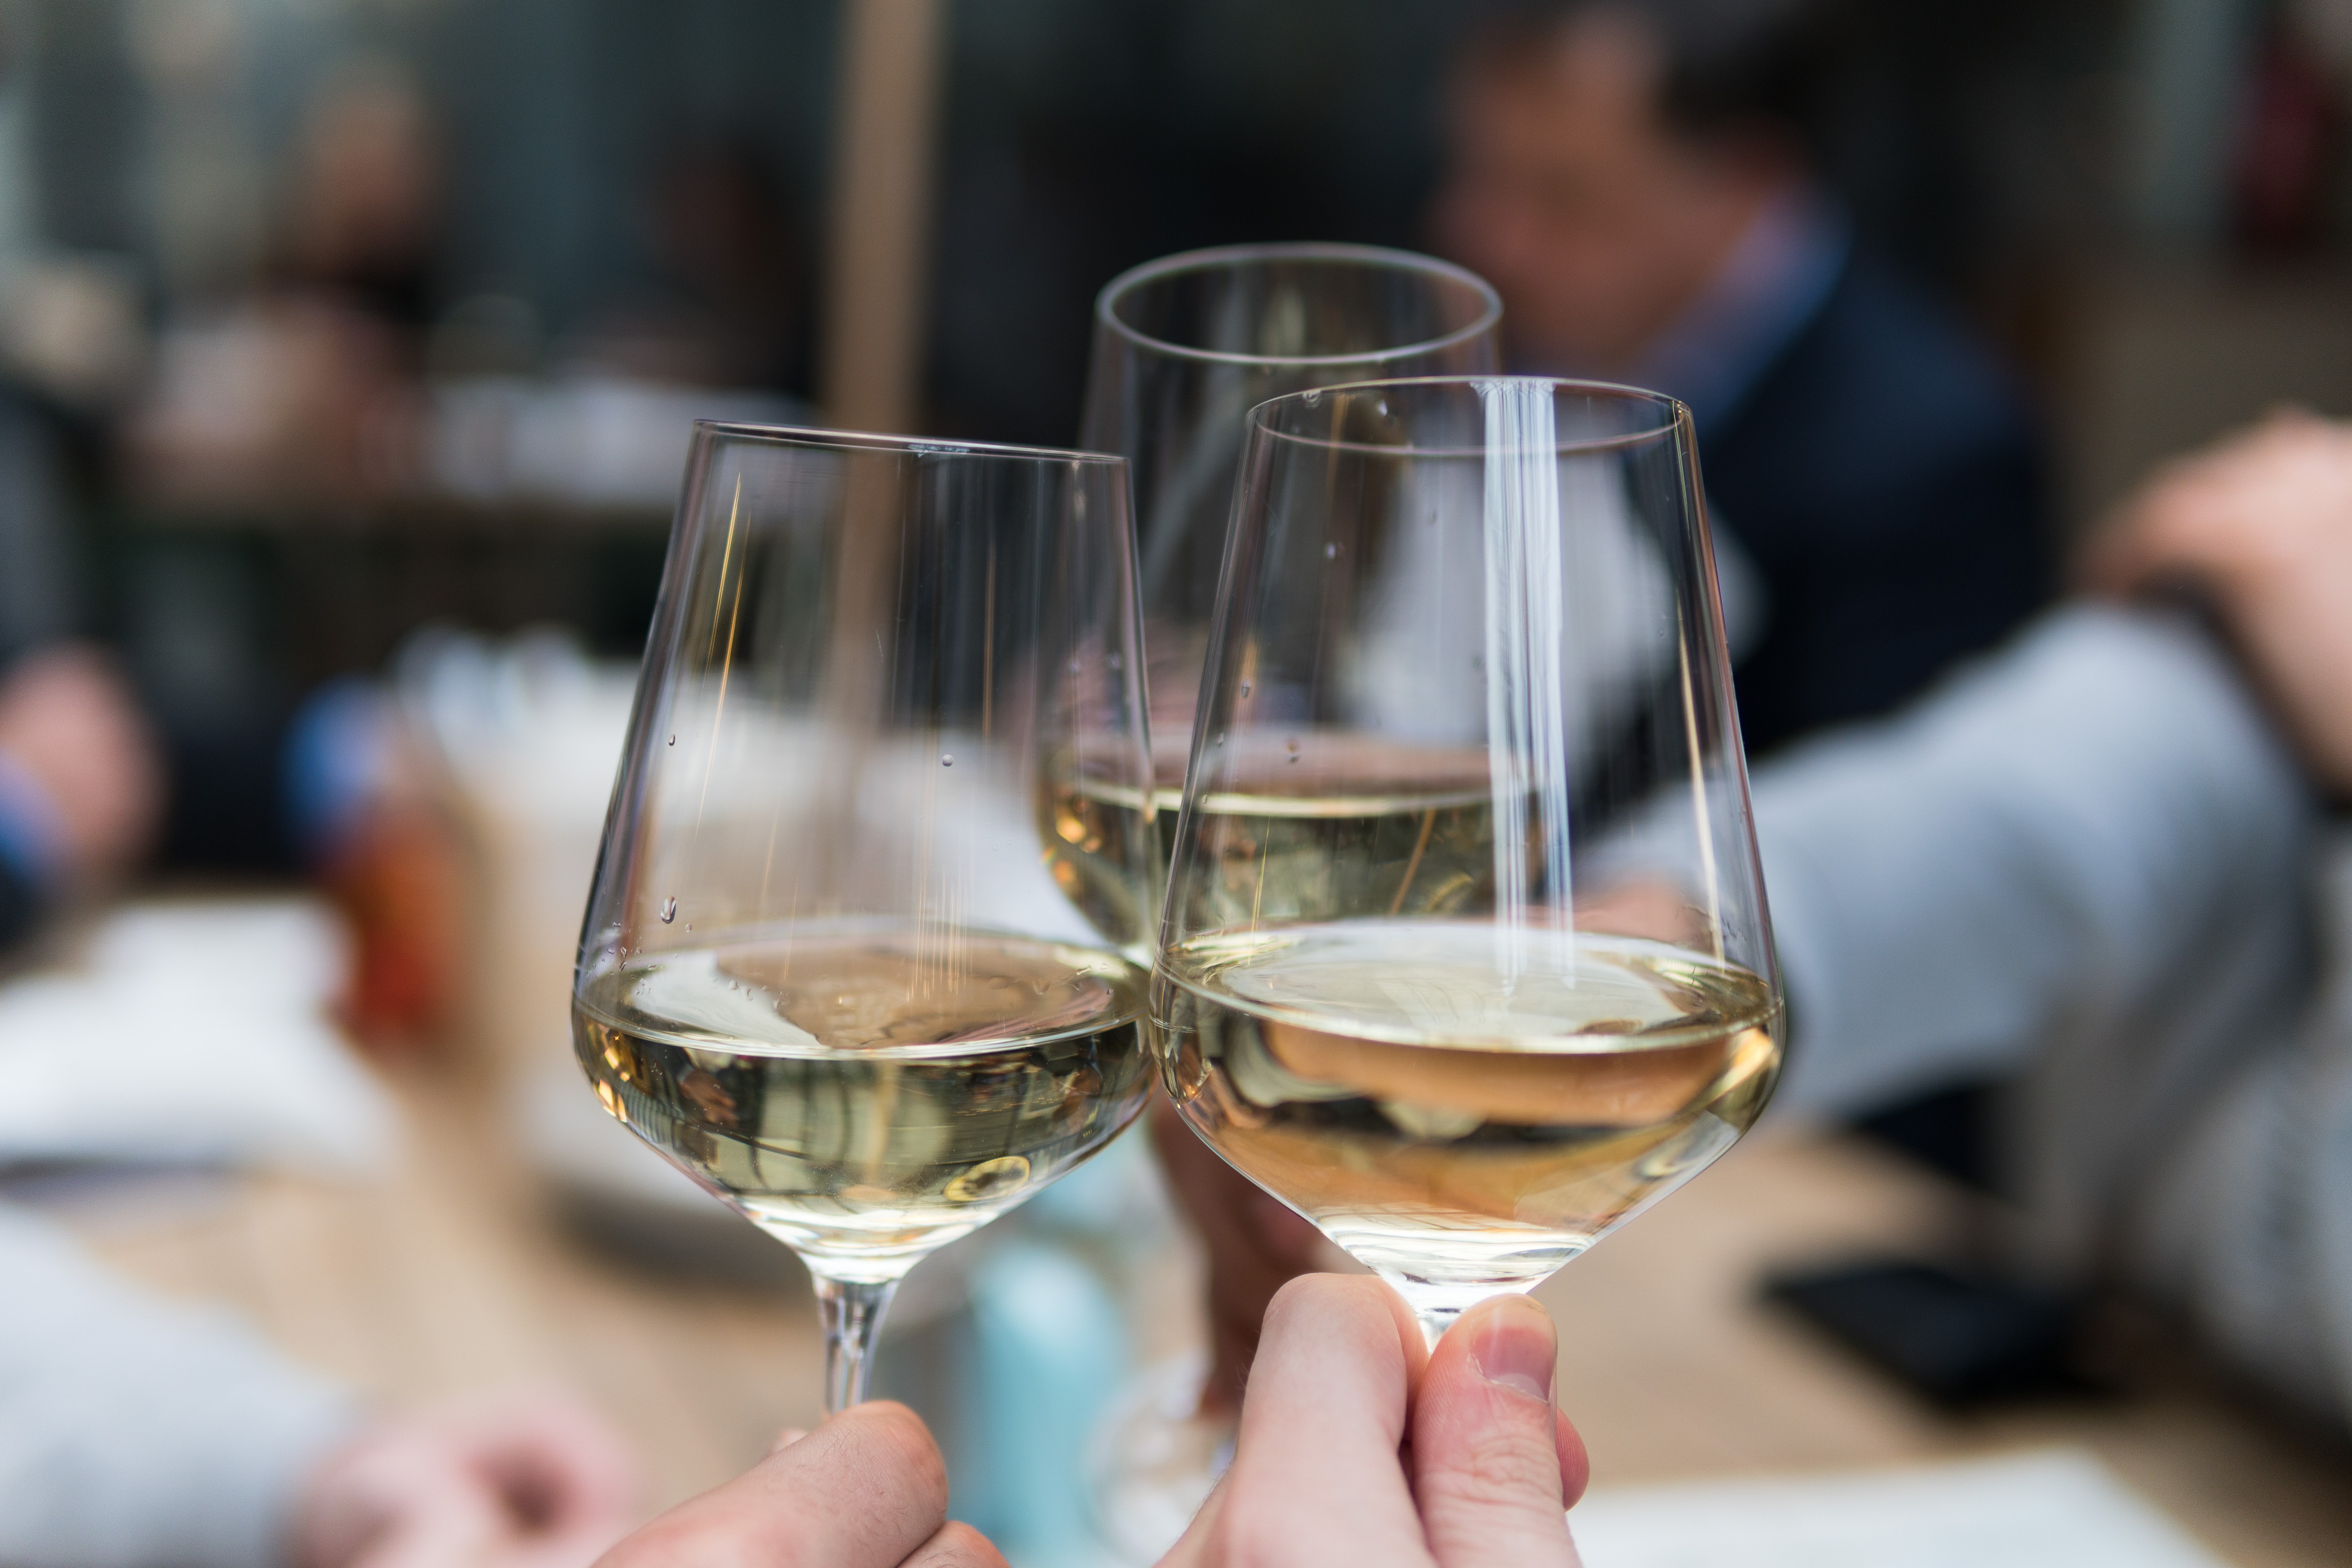 people toasting with wine glasses filled with white wine